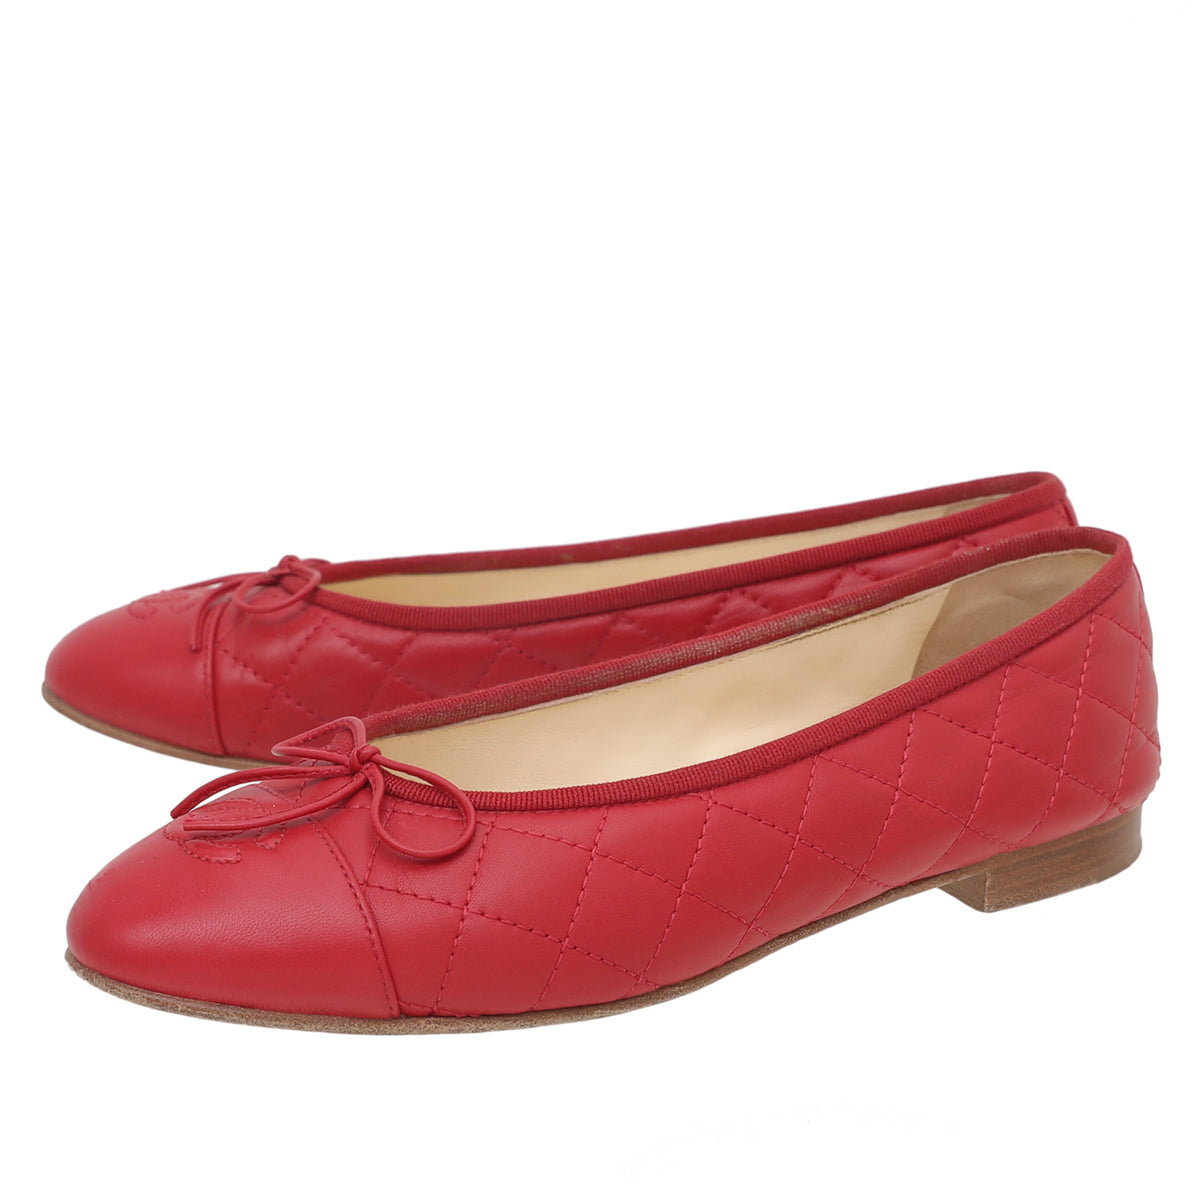 Chanel Red Quilted Cap Toe Ballerina Flats 38.5 – The Closet